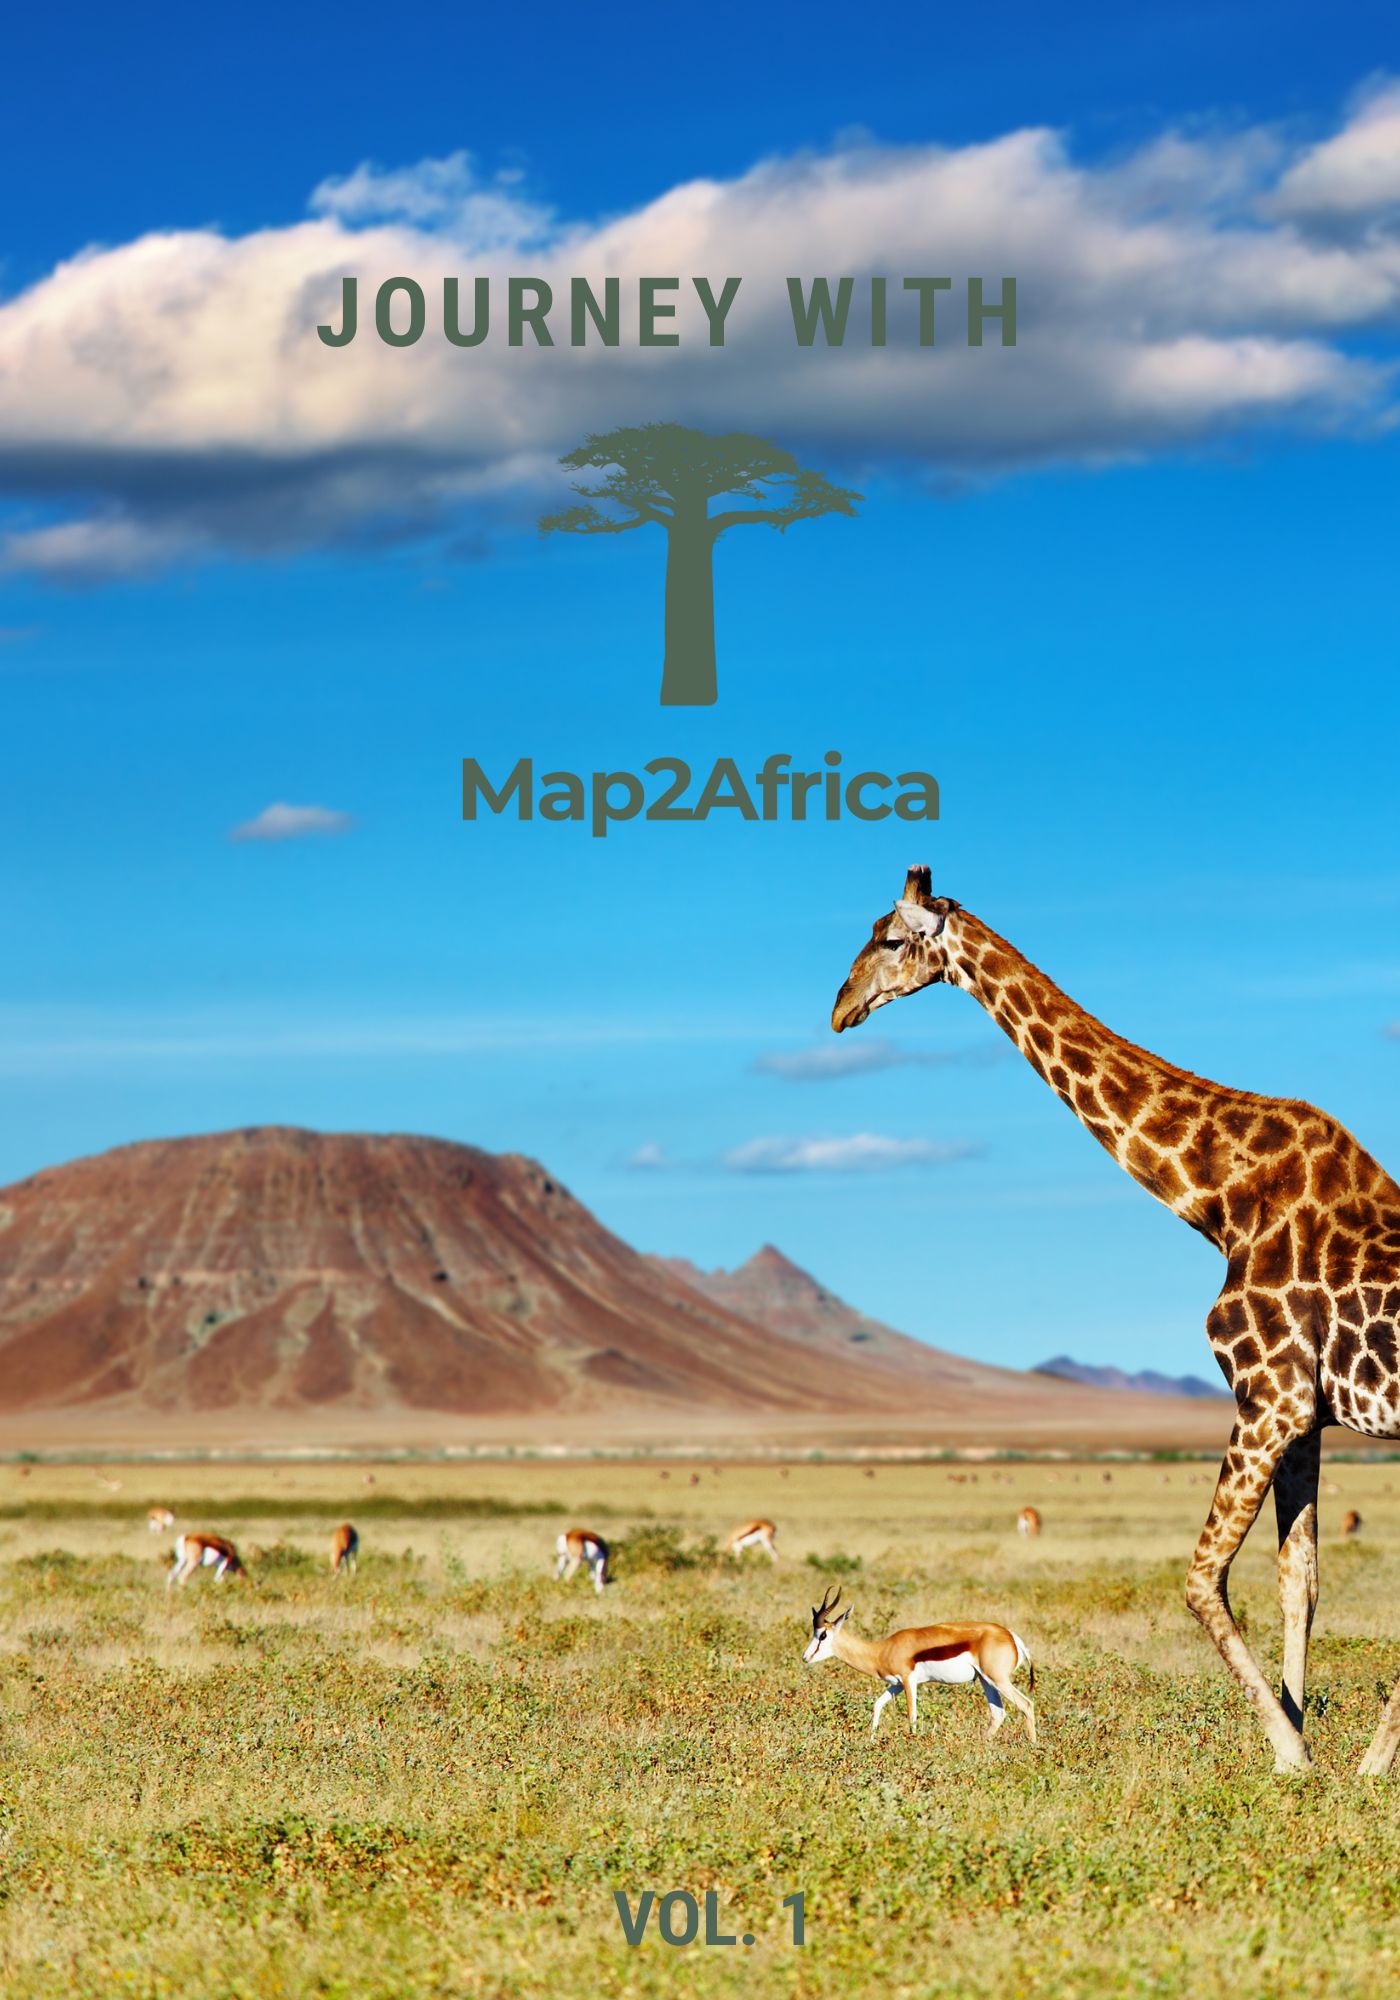 Cover image for the 'Map2Africa Guide to African Safari' E-book, featuring a stylized map of the African continent. The map is dotted with illustrations representing different wildlife such as elephants, lions, giraffes and rhinos, as well as iconic landmarks like Mount Kilimanjaro and the Pyramids of Egypt. The title of the e-book is prominently displayed in bold typography at the top of the image."